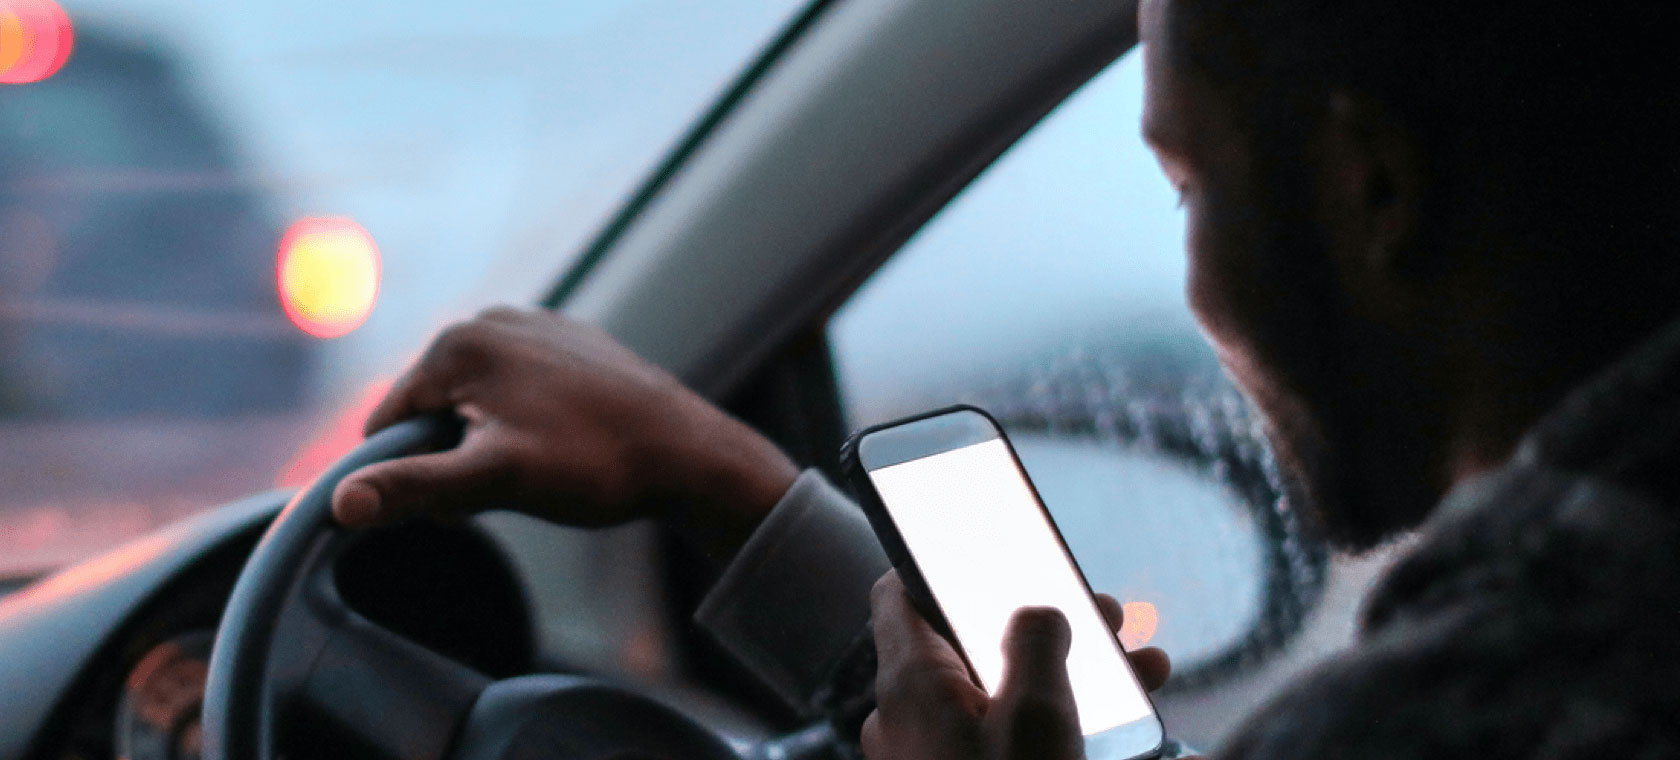 Distracted Driving Laws: Texting and Cell Phones